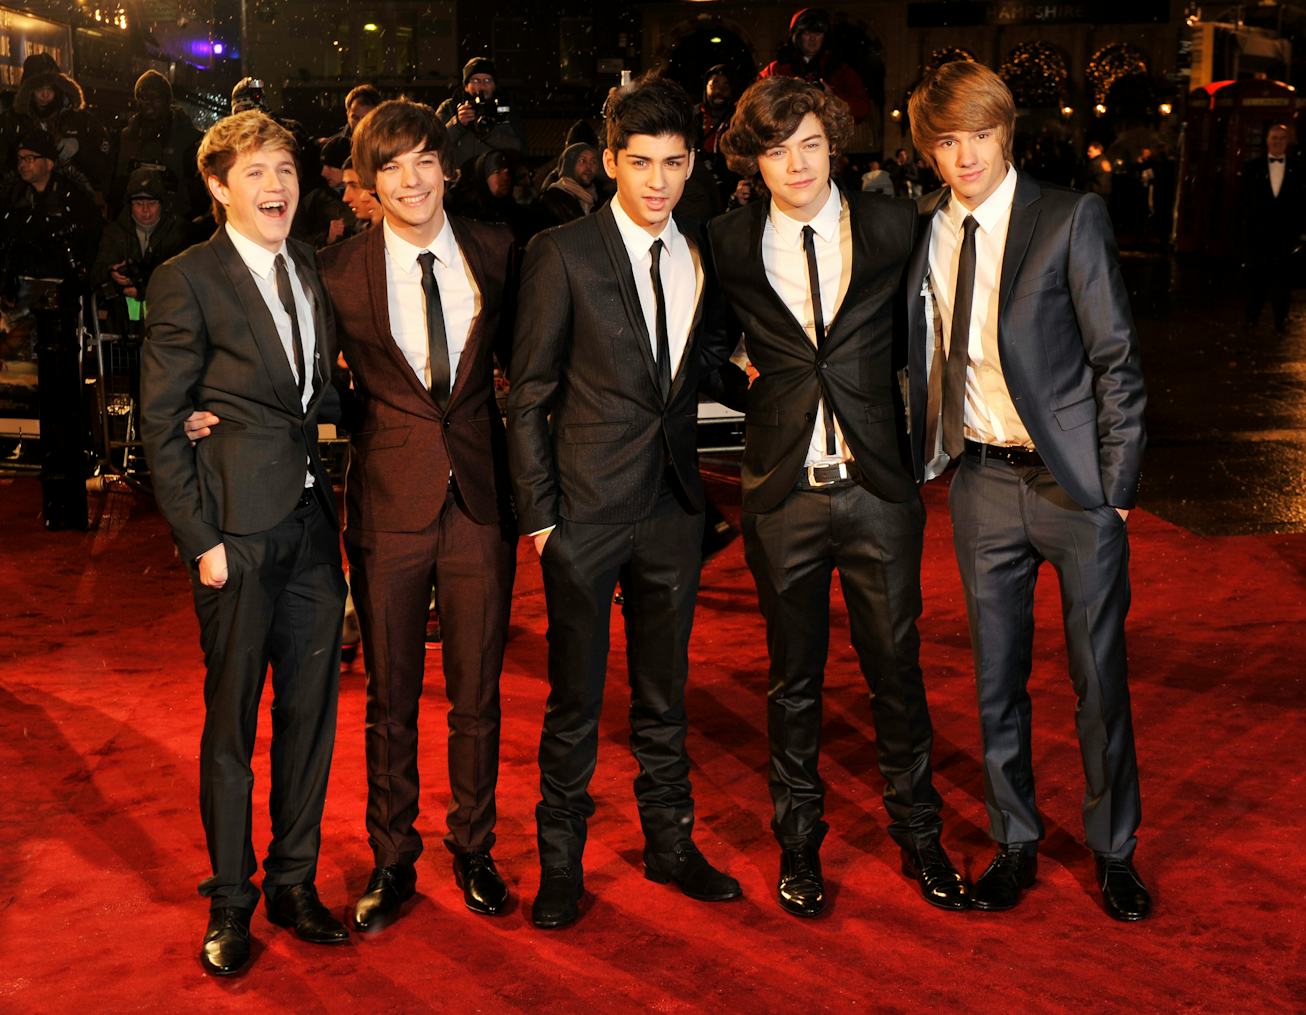 One Direction at The Chronicles Of Narnia: The Voyage Of The Dawn Treader premiere in 2010